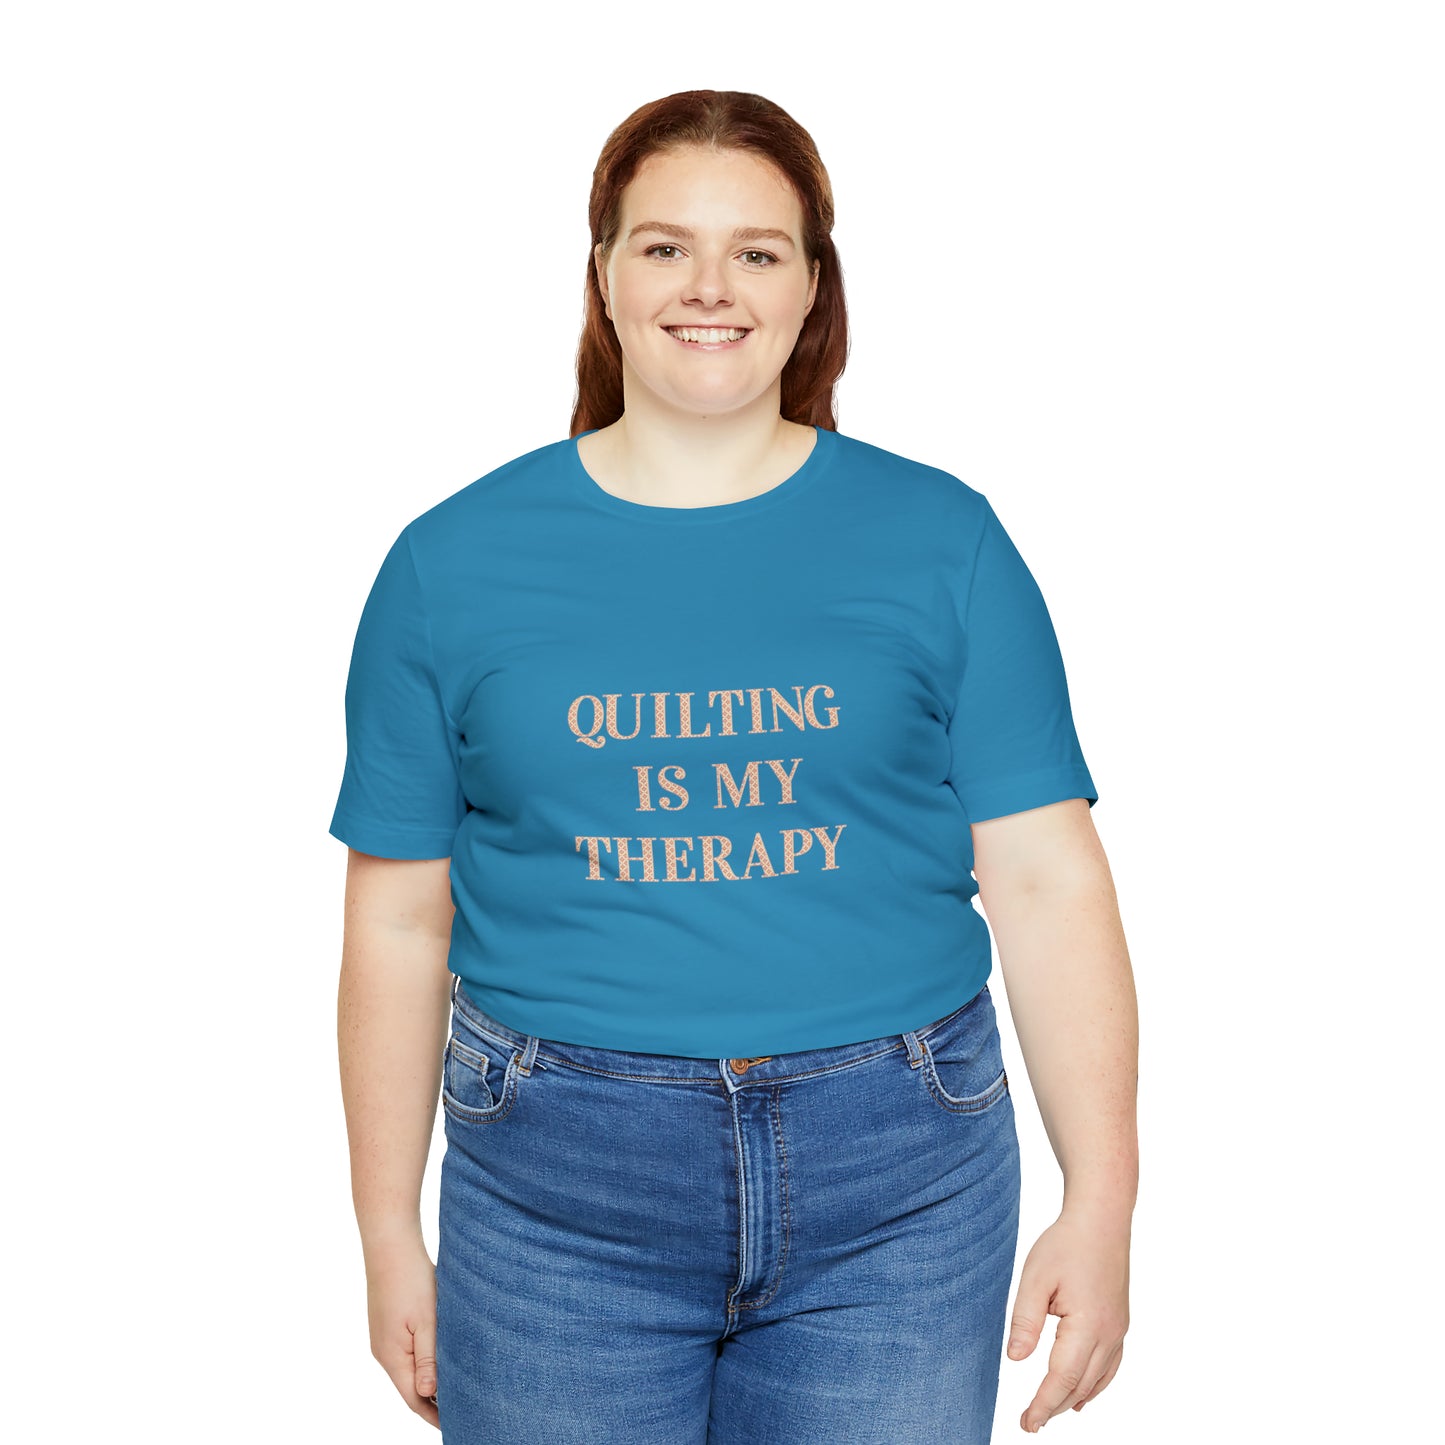 Hobby, Quilting Is My Therapy- Adult, Regular Fit, Soft Cotton, Smaller Size Image, T-shirt